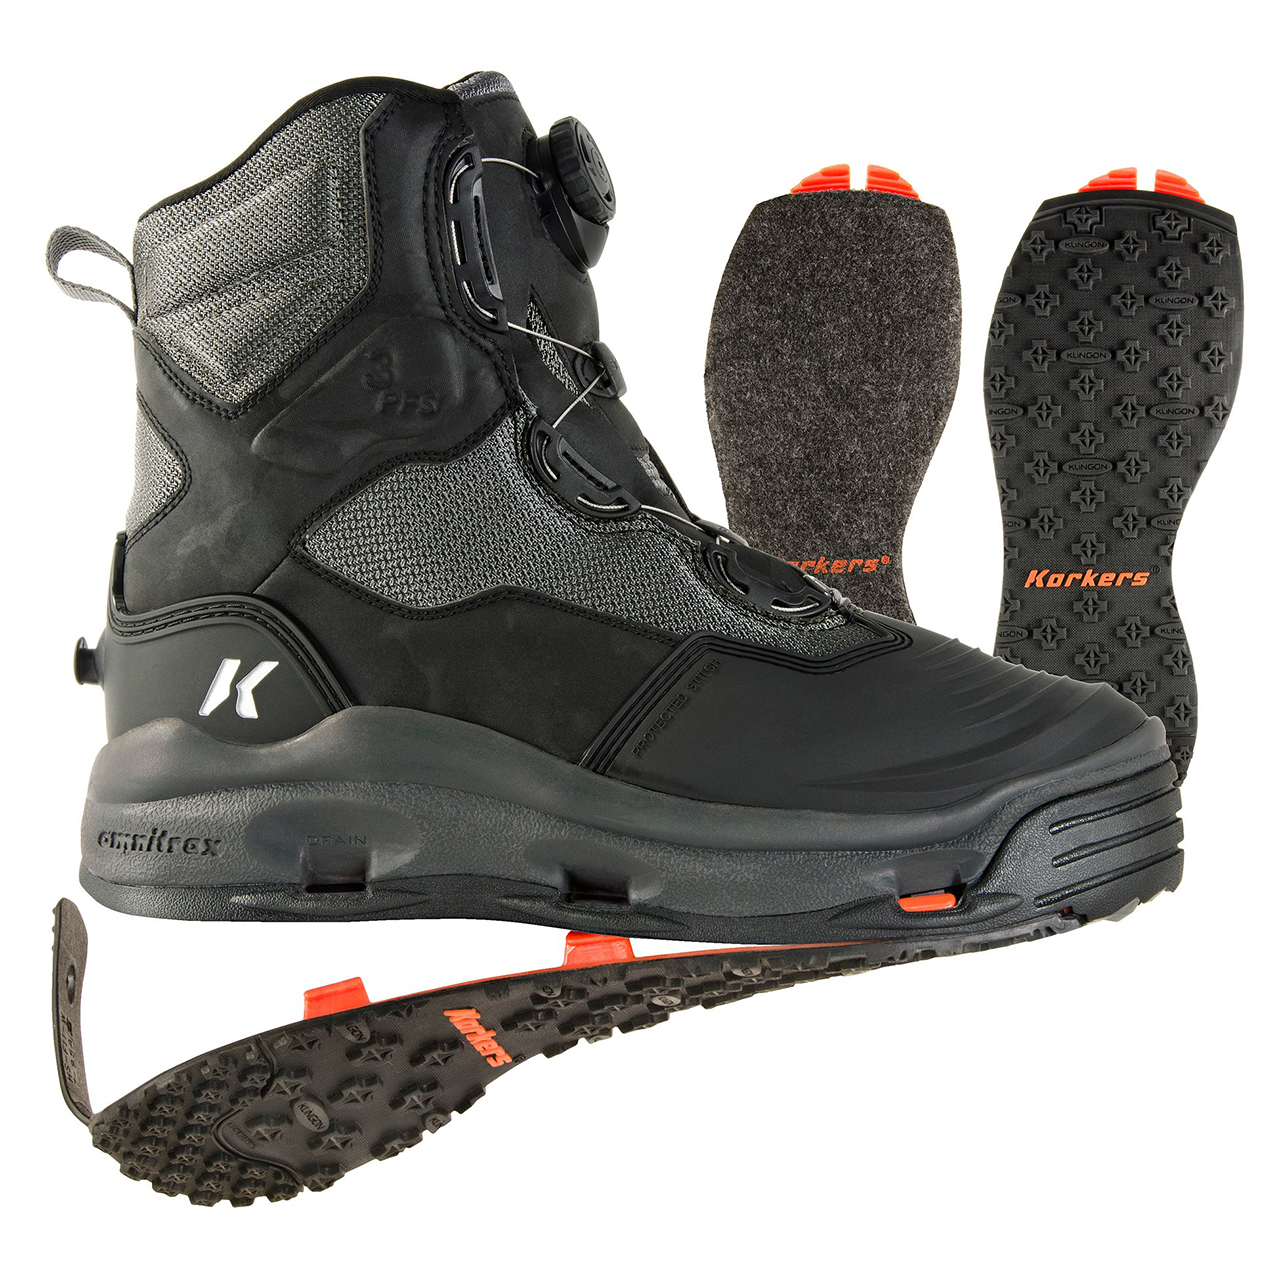 Frogg Toggs HELLBENDER Wading Boots ~ Felt Soles - The Fly Fishing